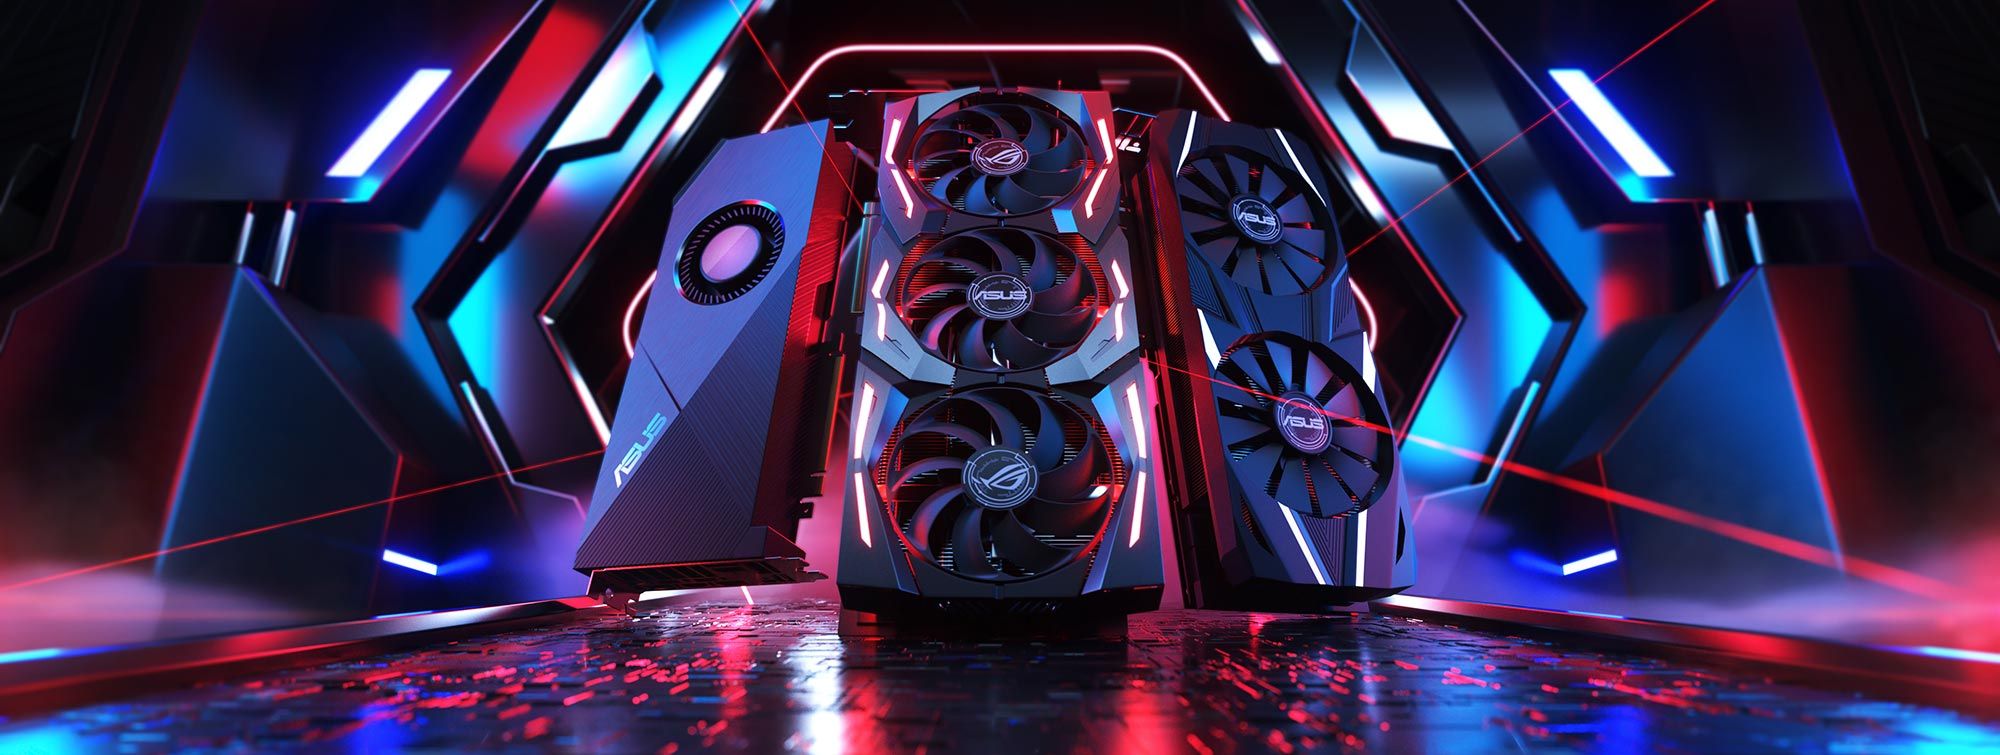 Introducing GeForce RTX 2080 Ti and RTX 2080 graphics cards